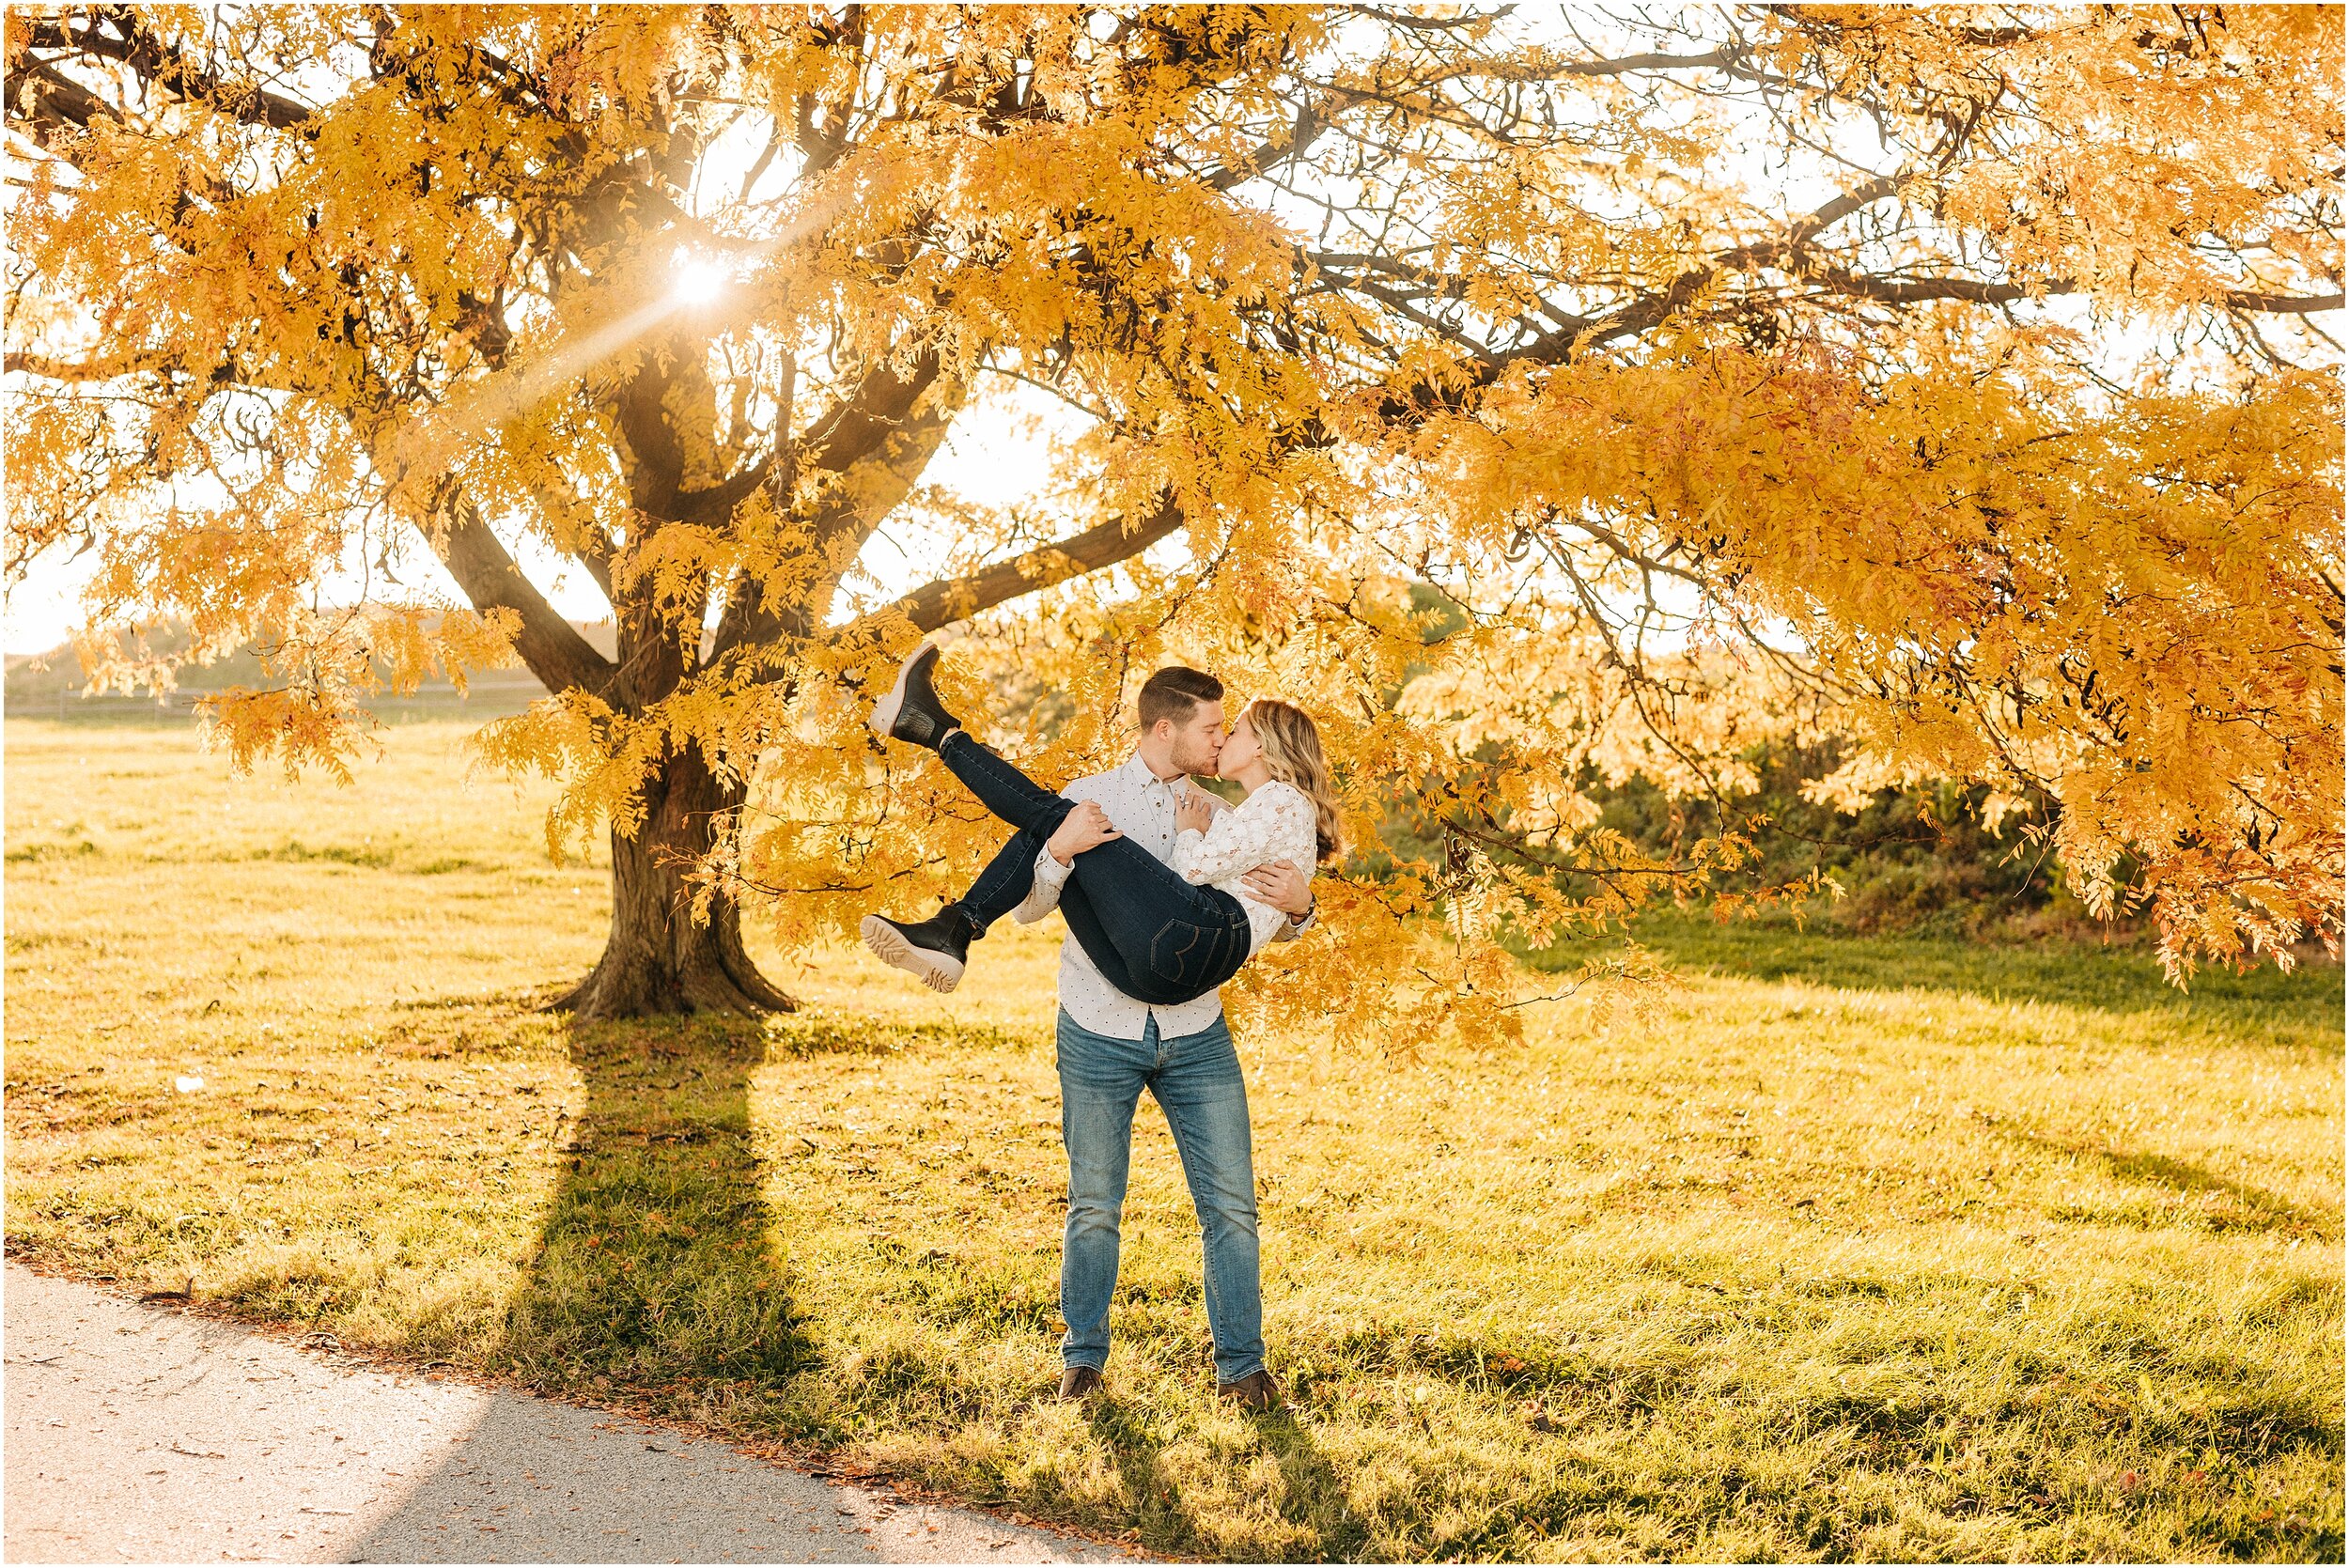 hannah leigh photography Baltimore City Maryland October Engagement Session_7061.jpg